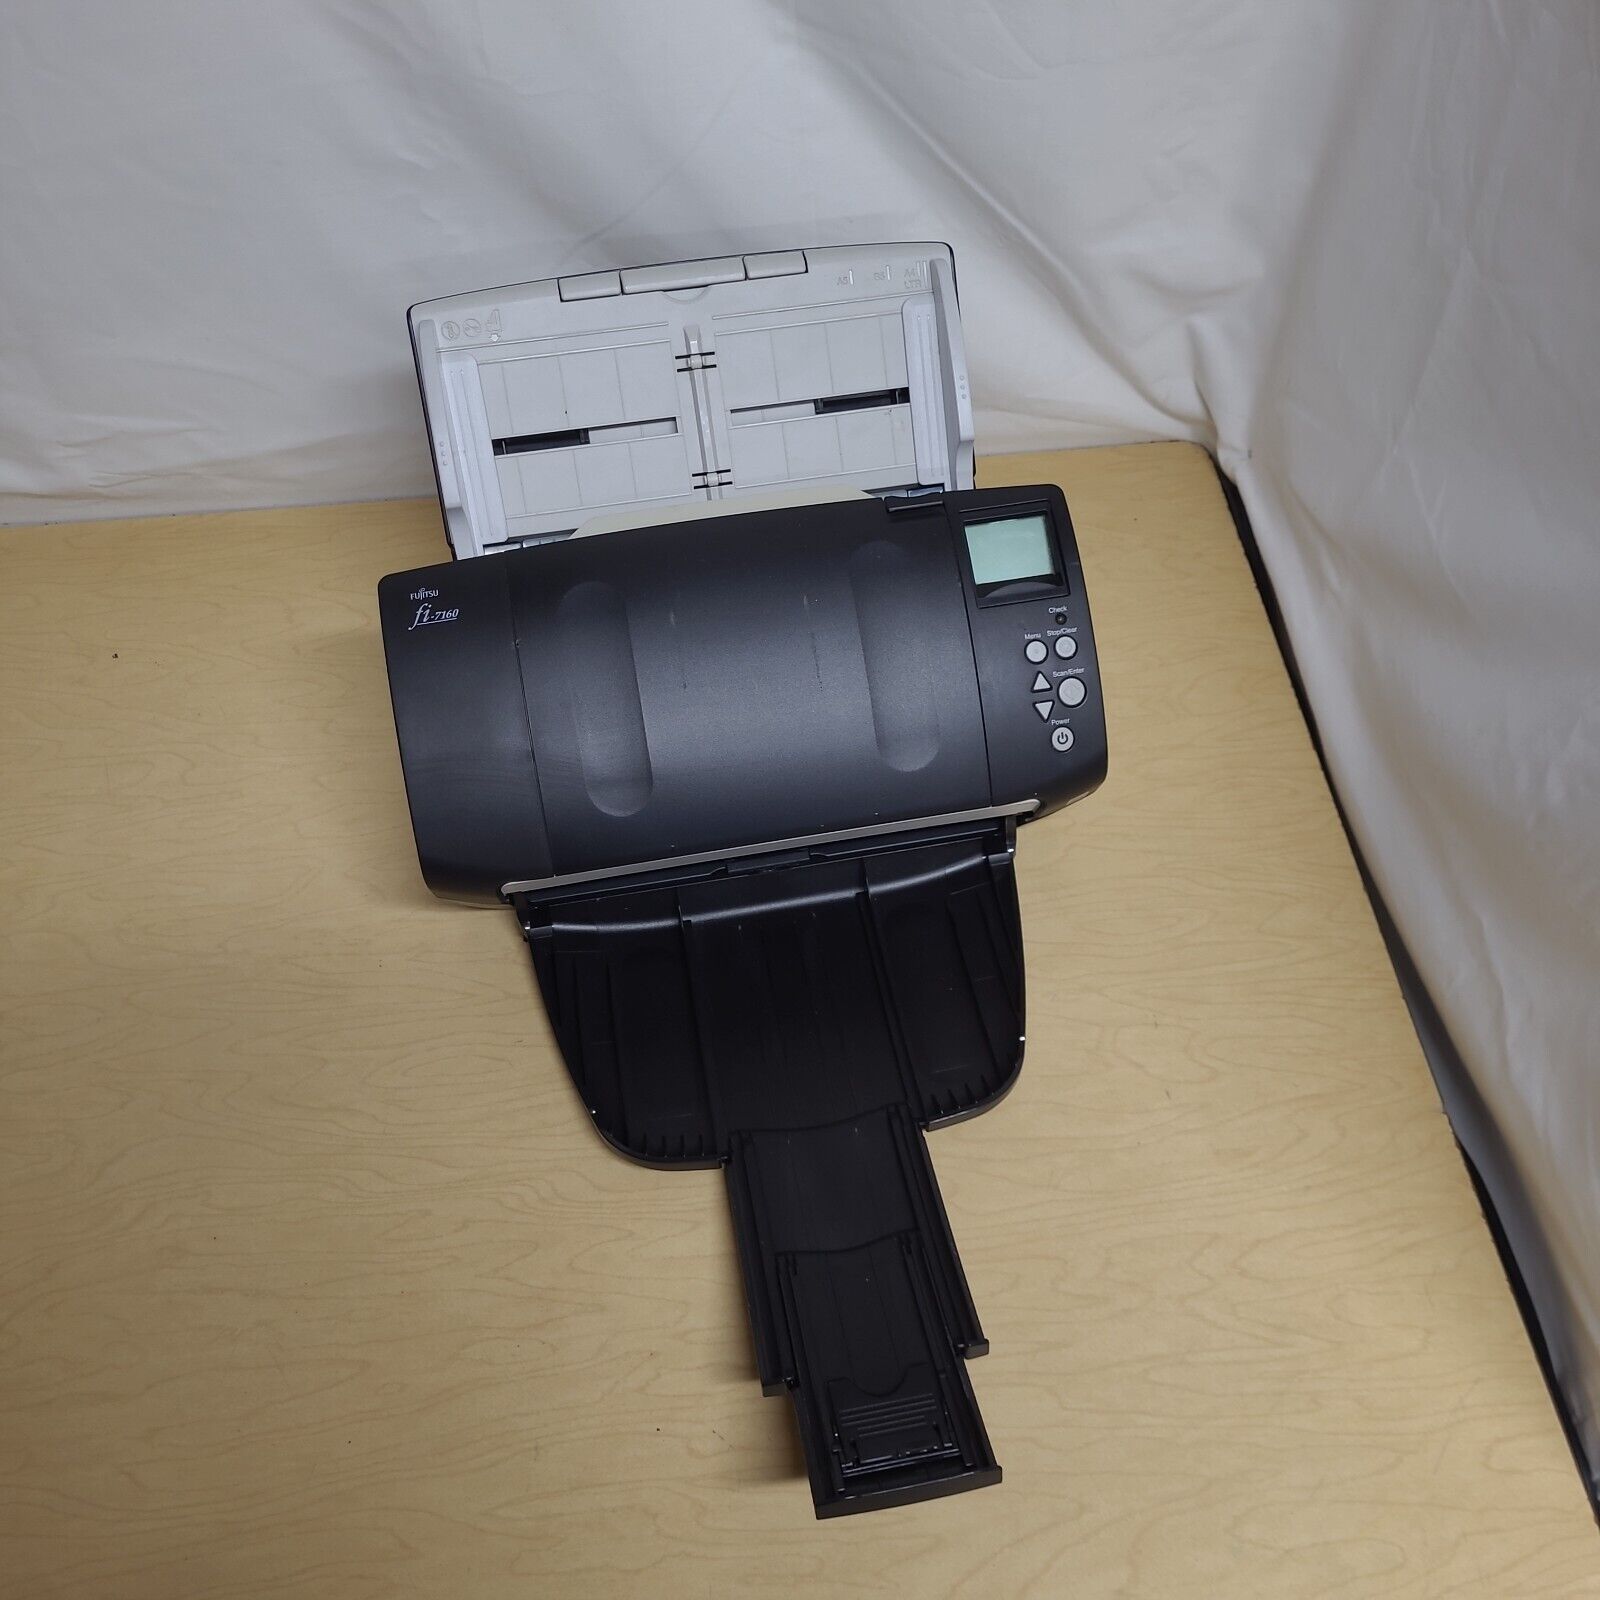 *NO ADAPTER* Fujitsu FI-7160 Color Duplex Document Scanner ONLY 1.3k SCANS